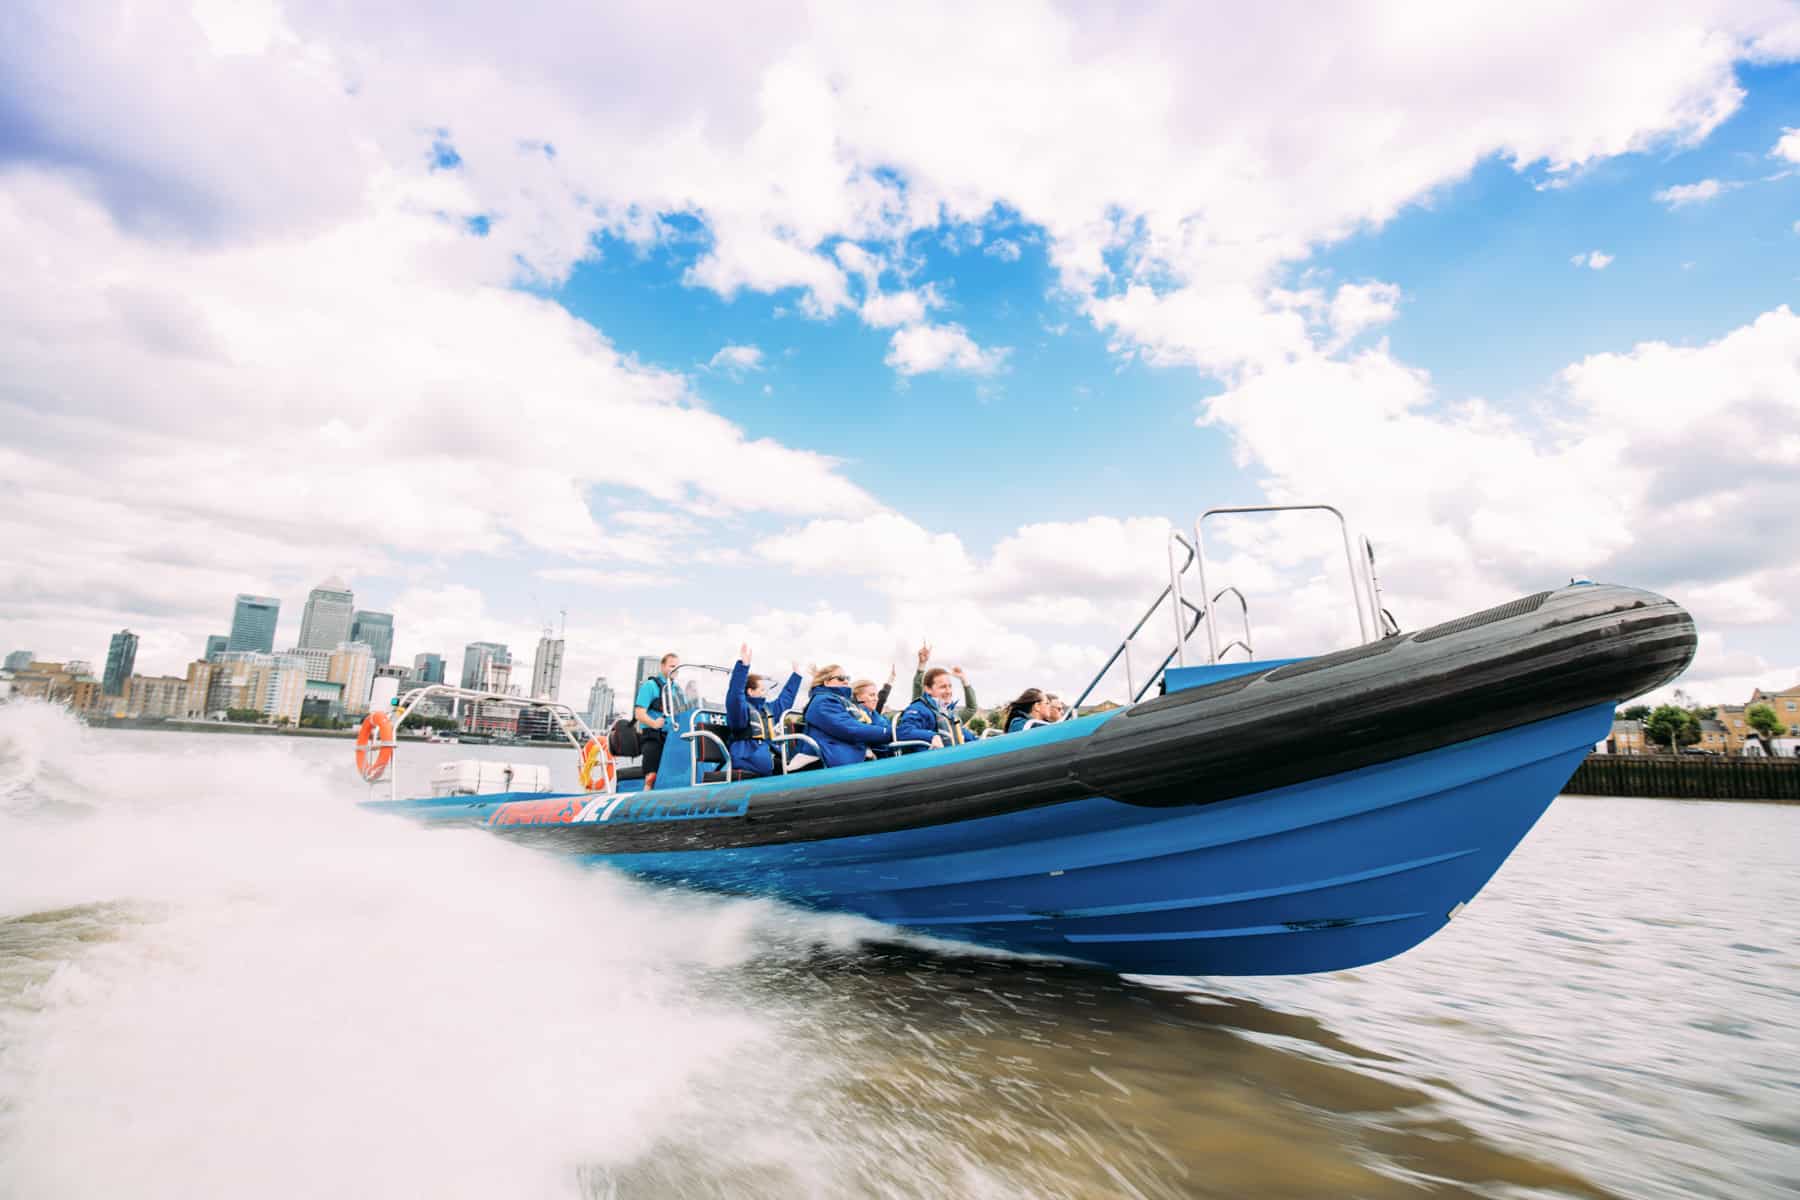 People with their hands in the air on a blue, high speed Thamesjet speedboat. Part of the London skyline can be seen in the background. 